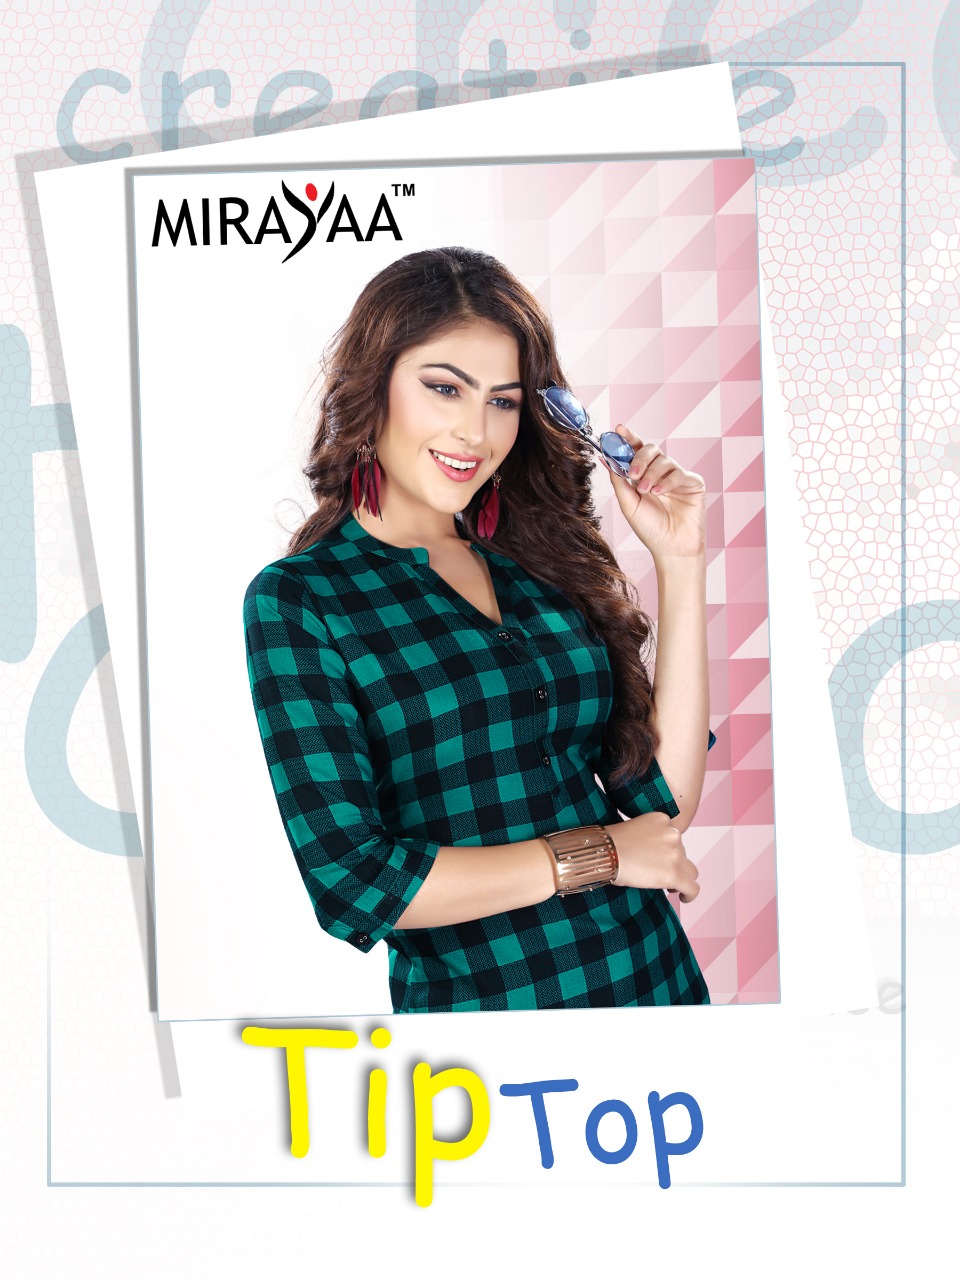 Mirayaa presents tip top casual ready to wear Top style concept